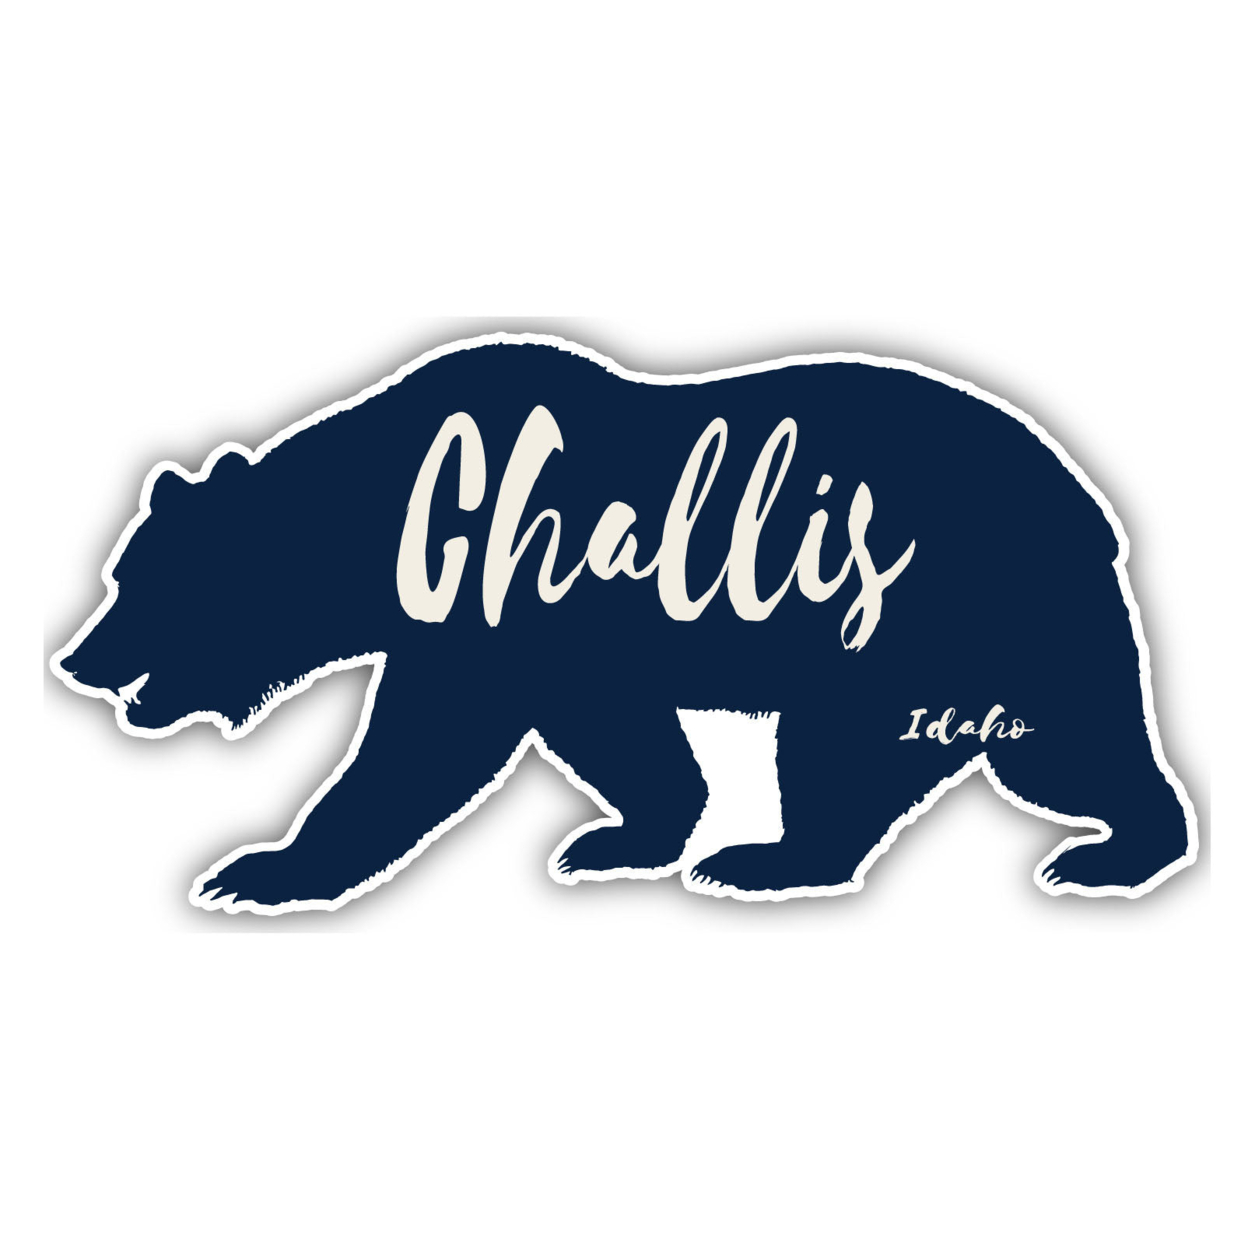 Challis Idaho Souvenir Decorative Stickers (Choose Theme And Size) - 4-Pack, 4-Inch, Tent